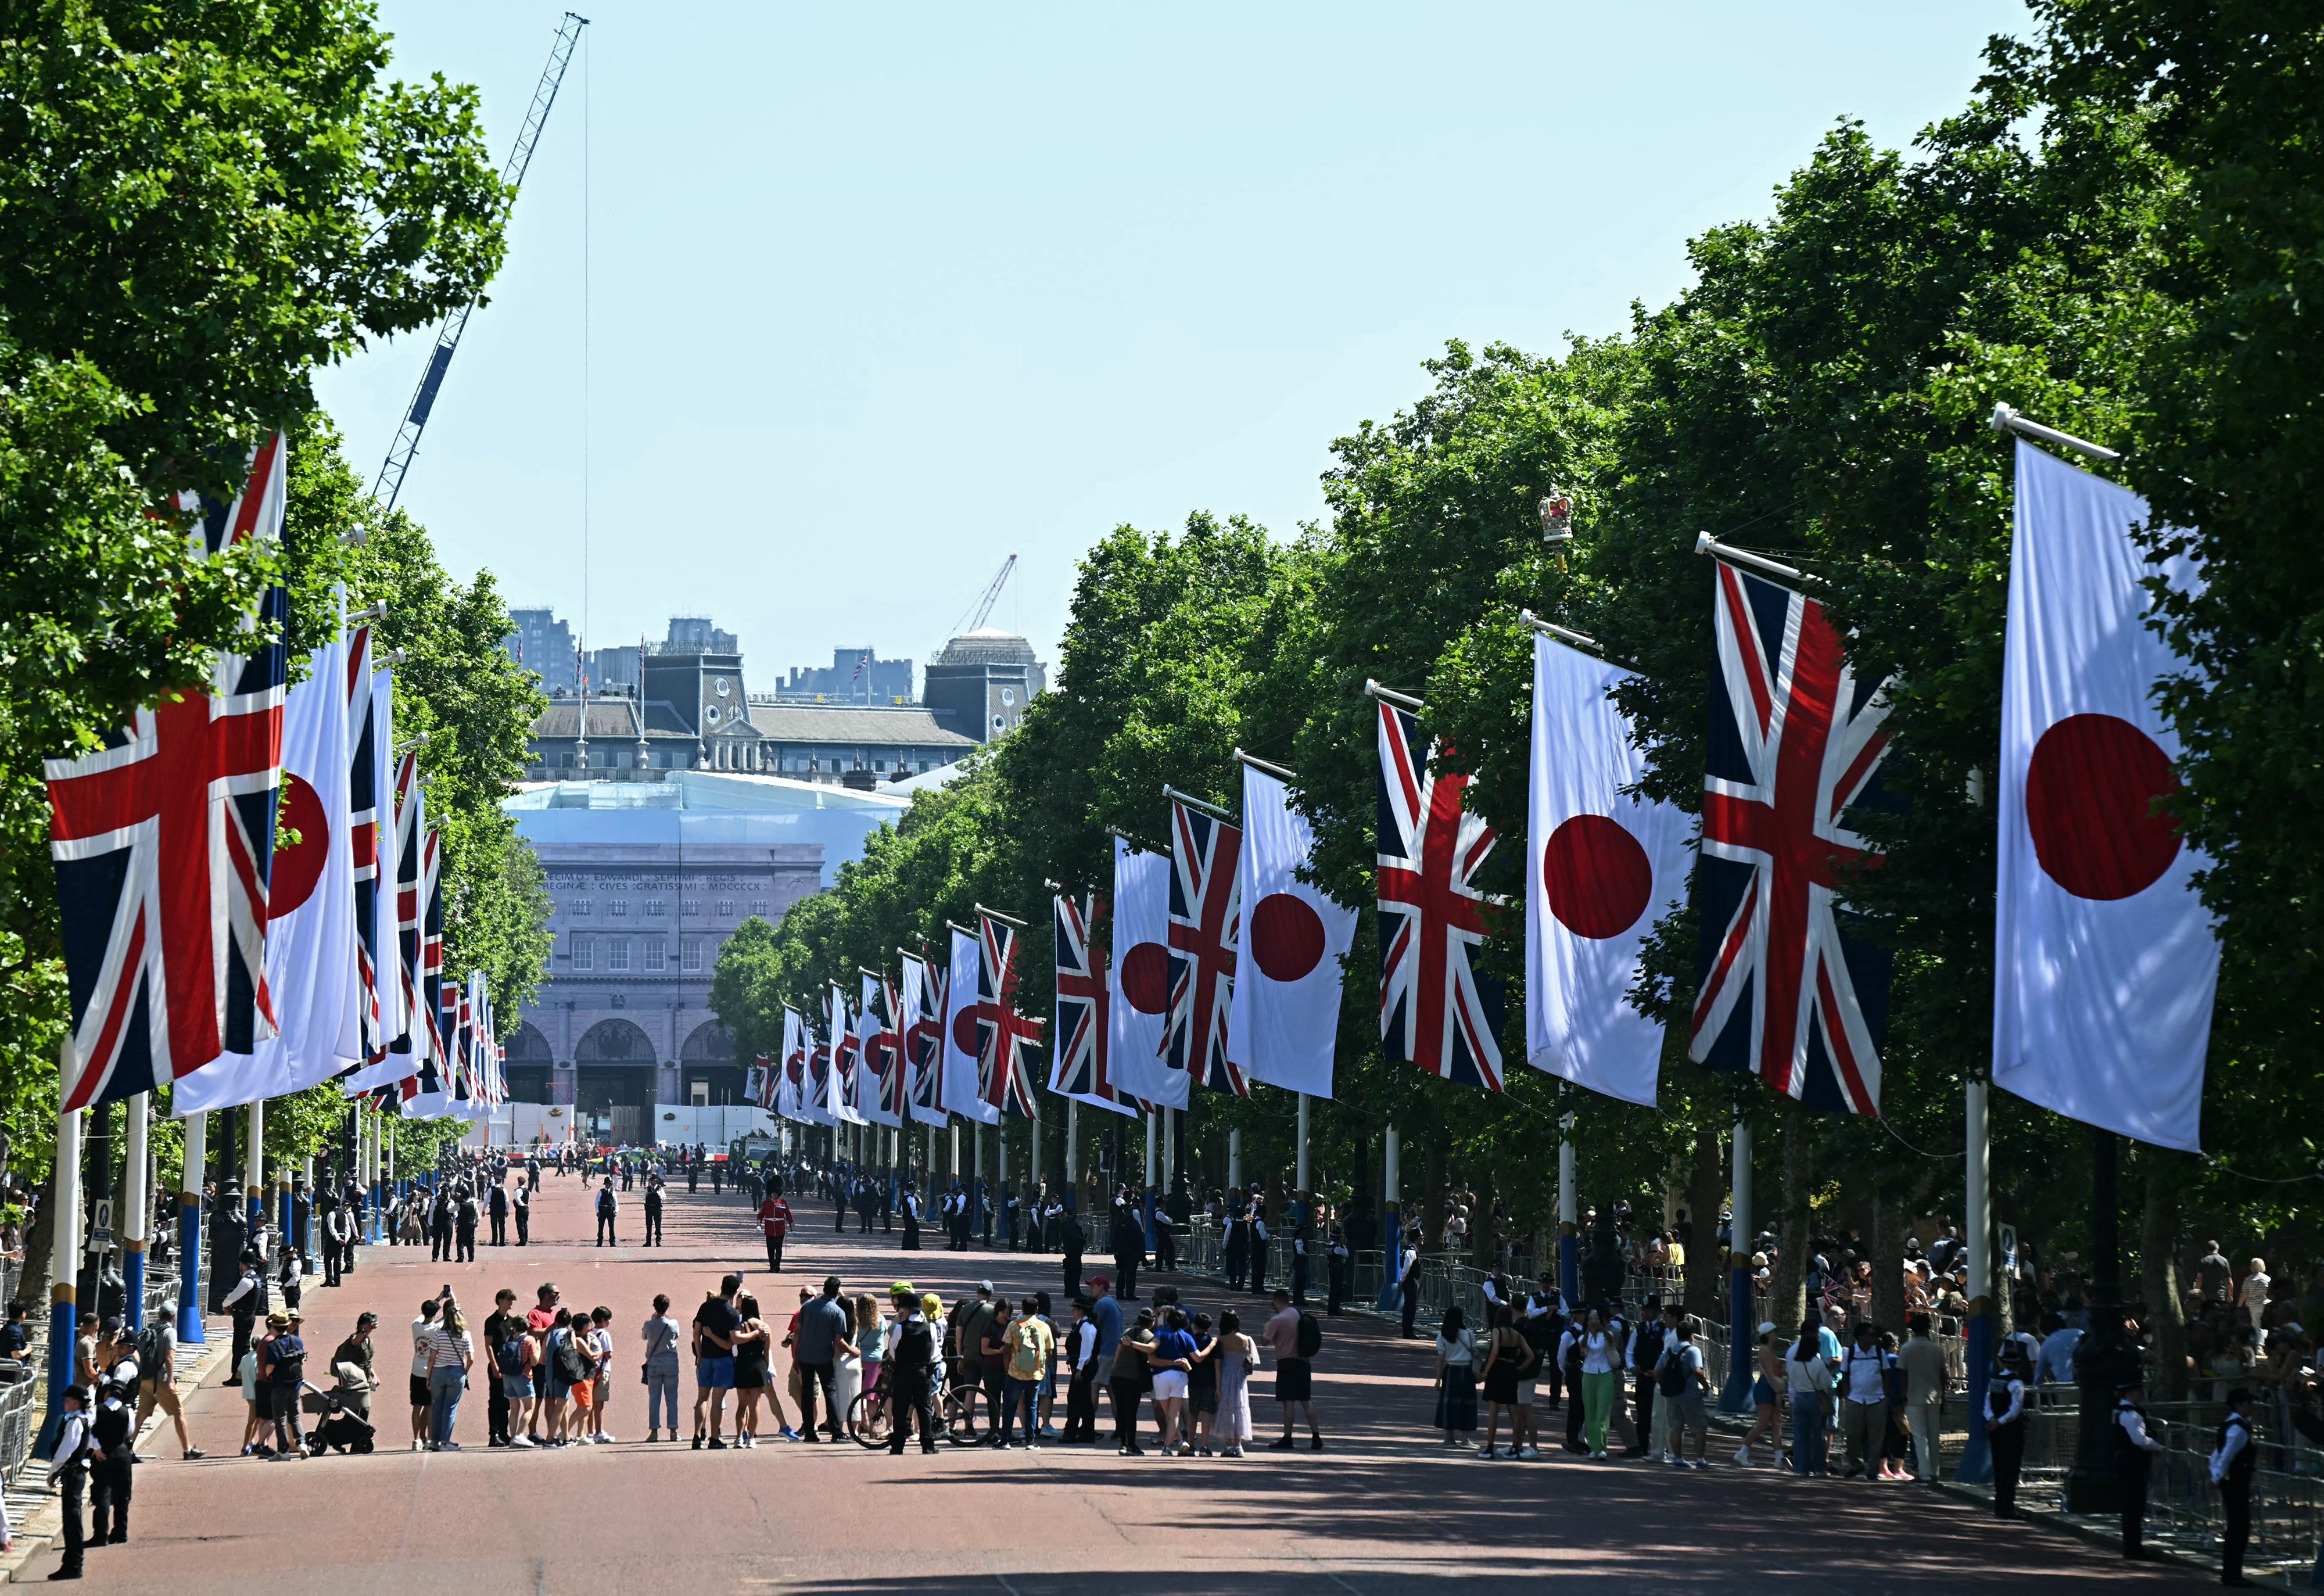 The Mall has been decorated with both Union Jacks and the Japanese flag.